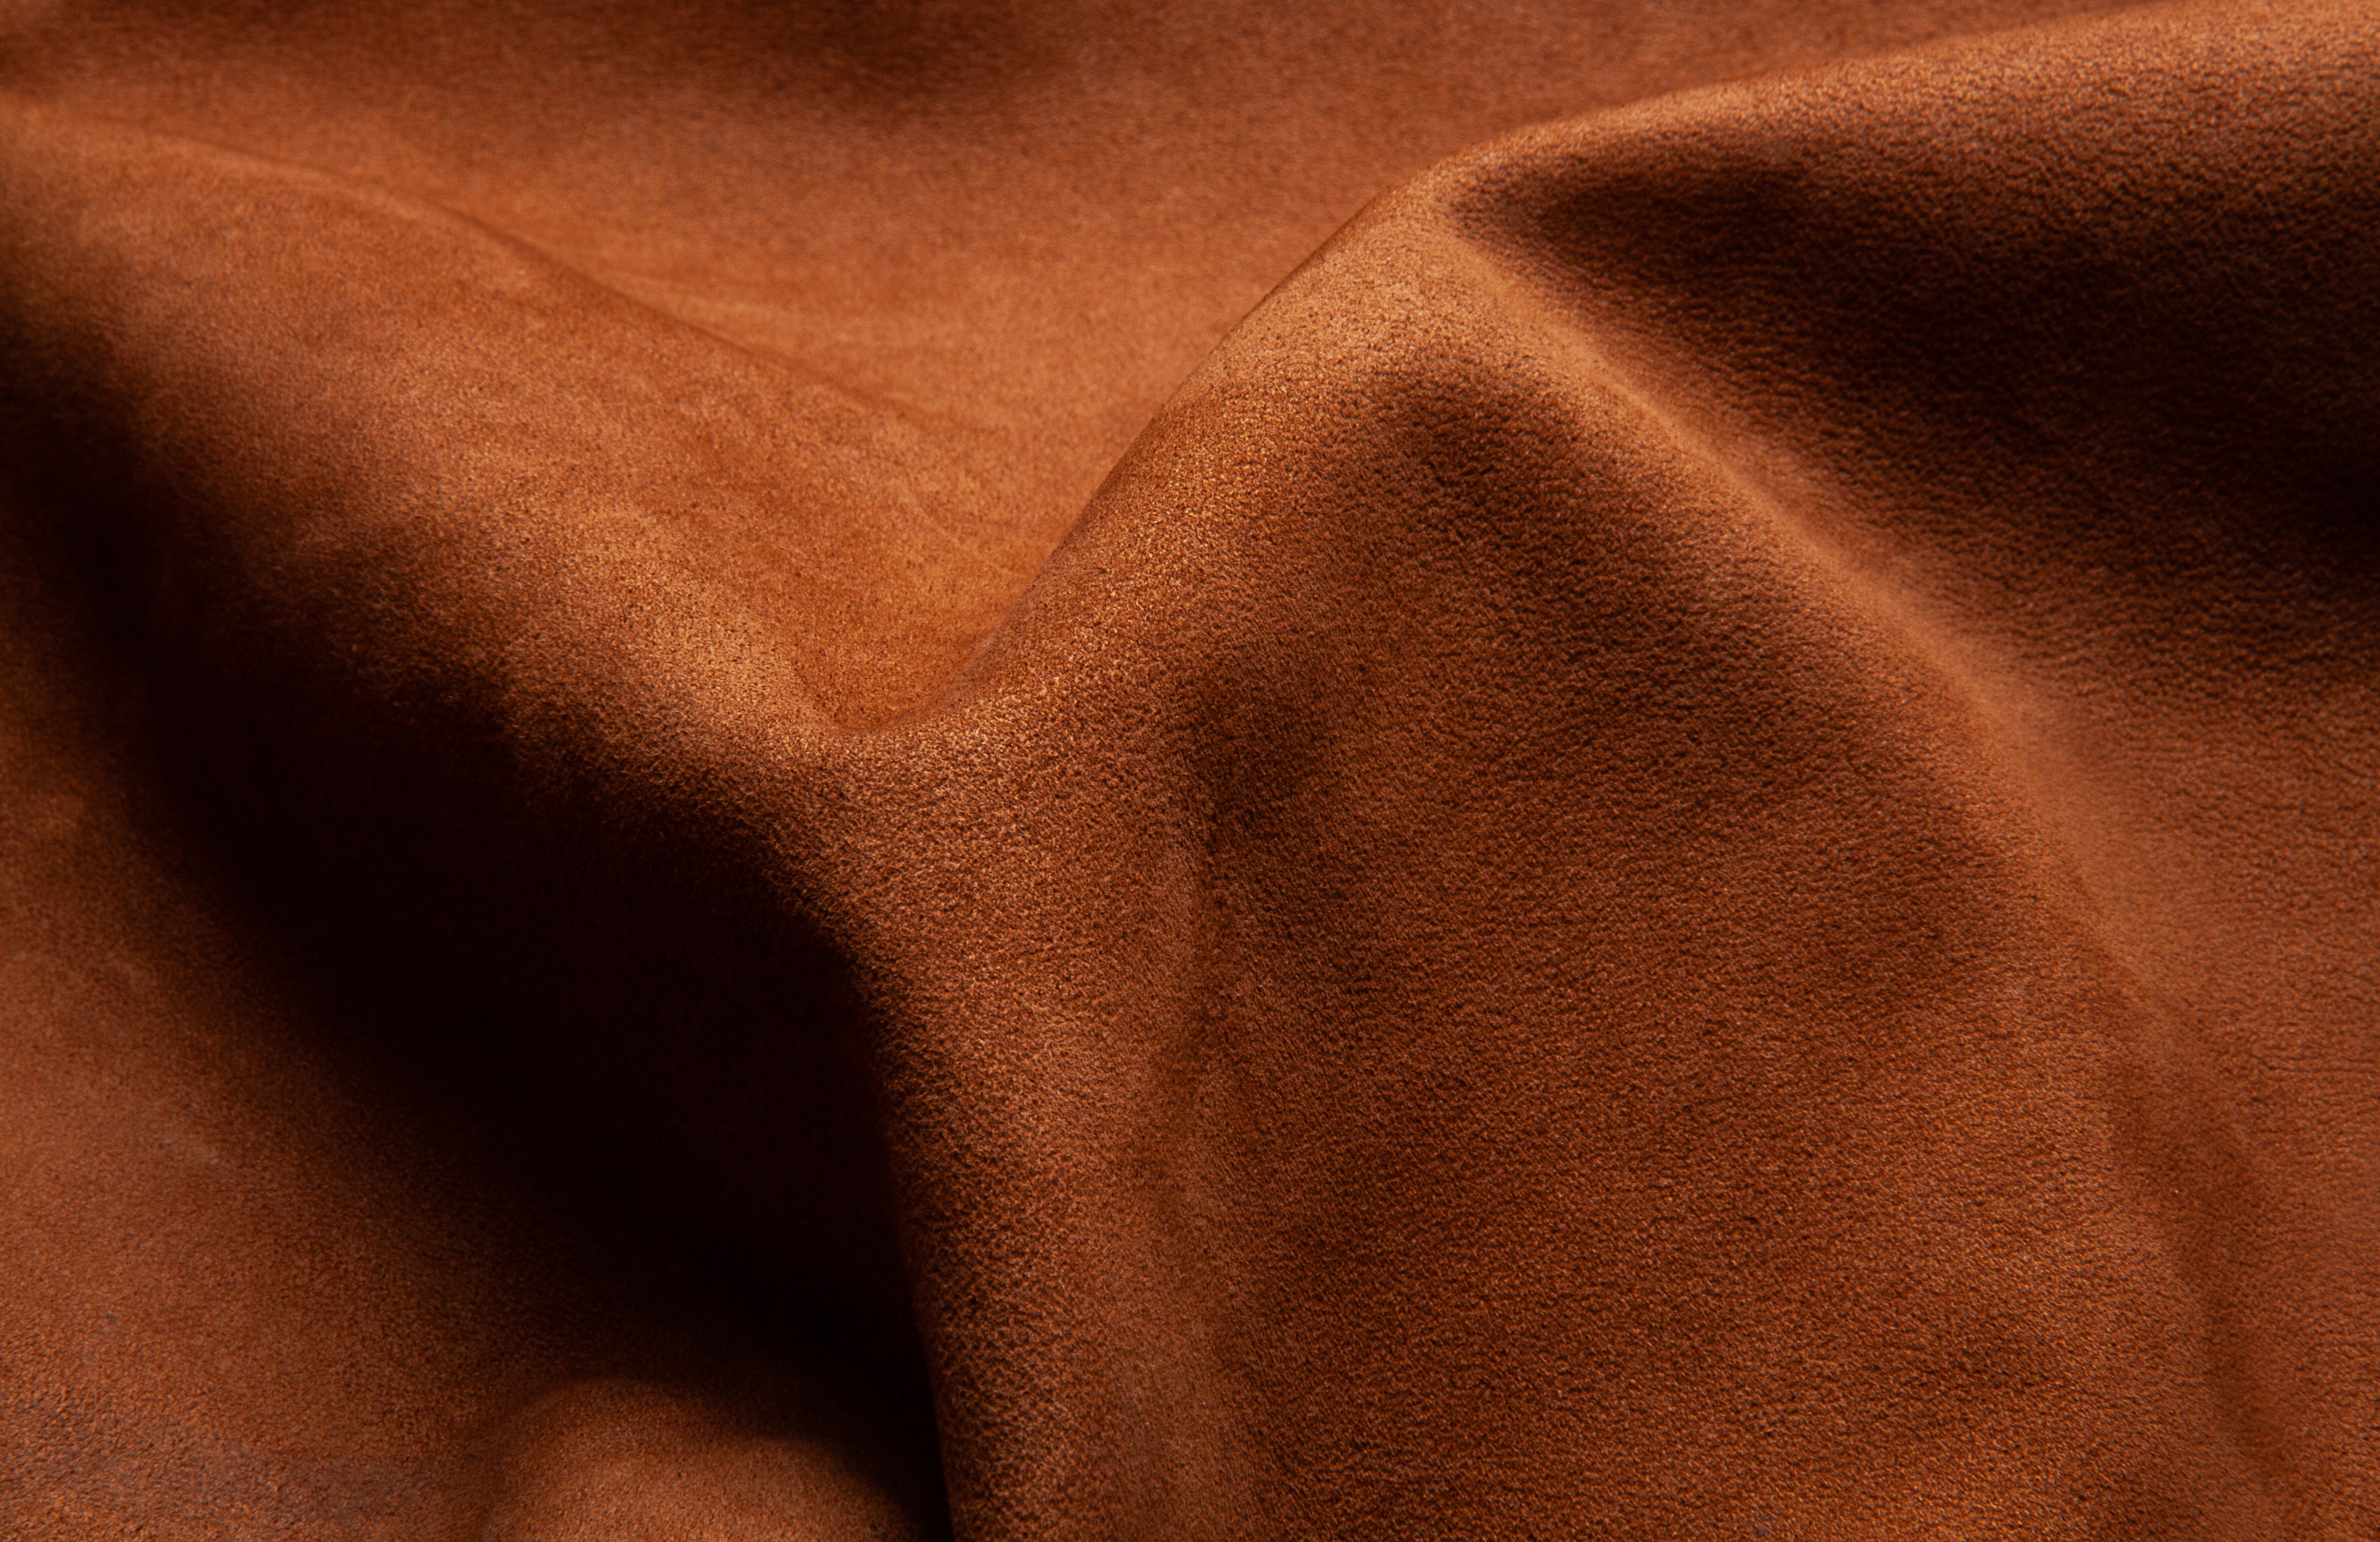 Full HD texture, textures, brown, folds, pleating, leather, skin